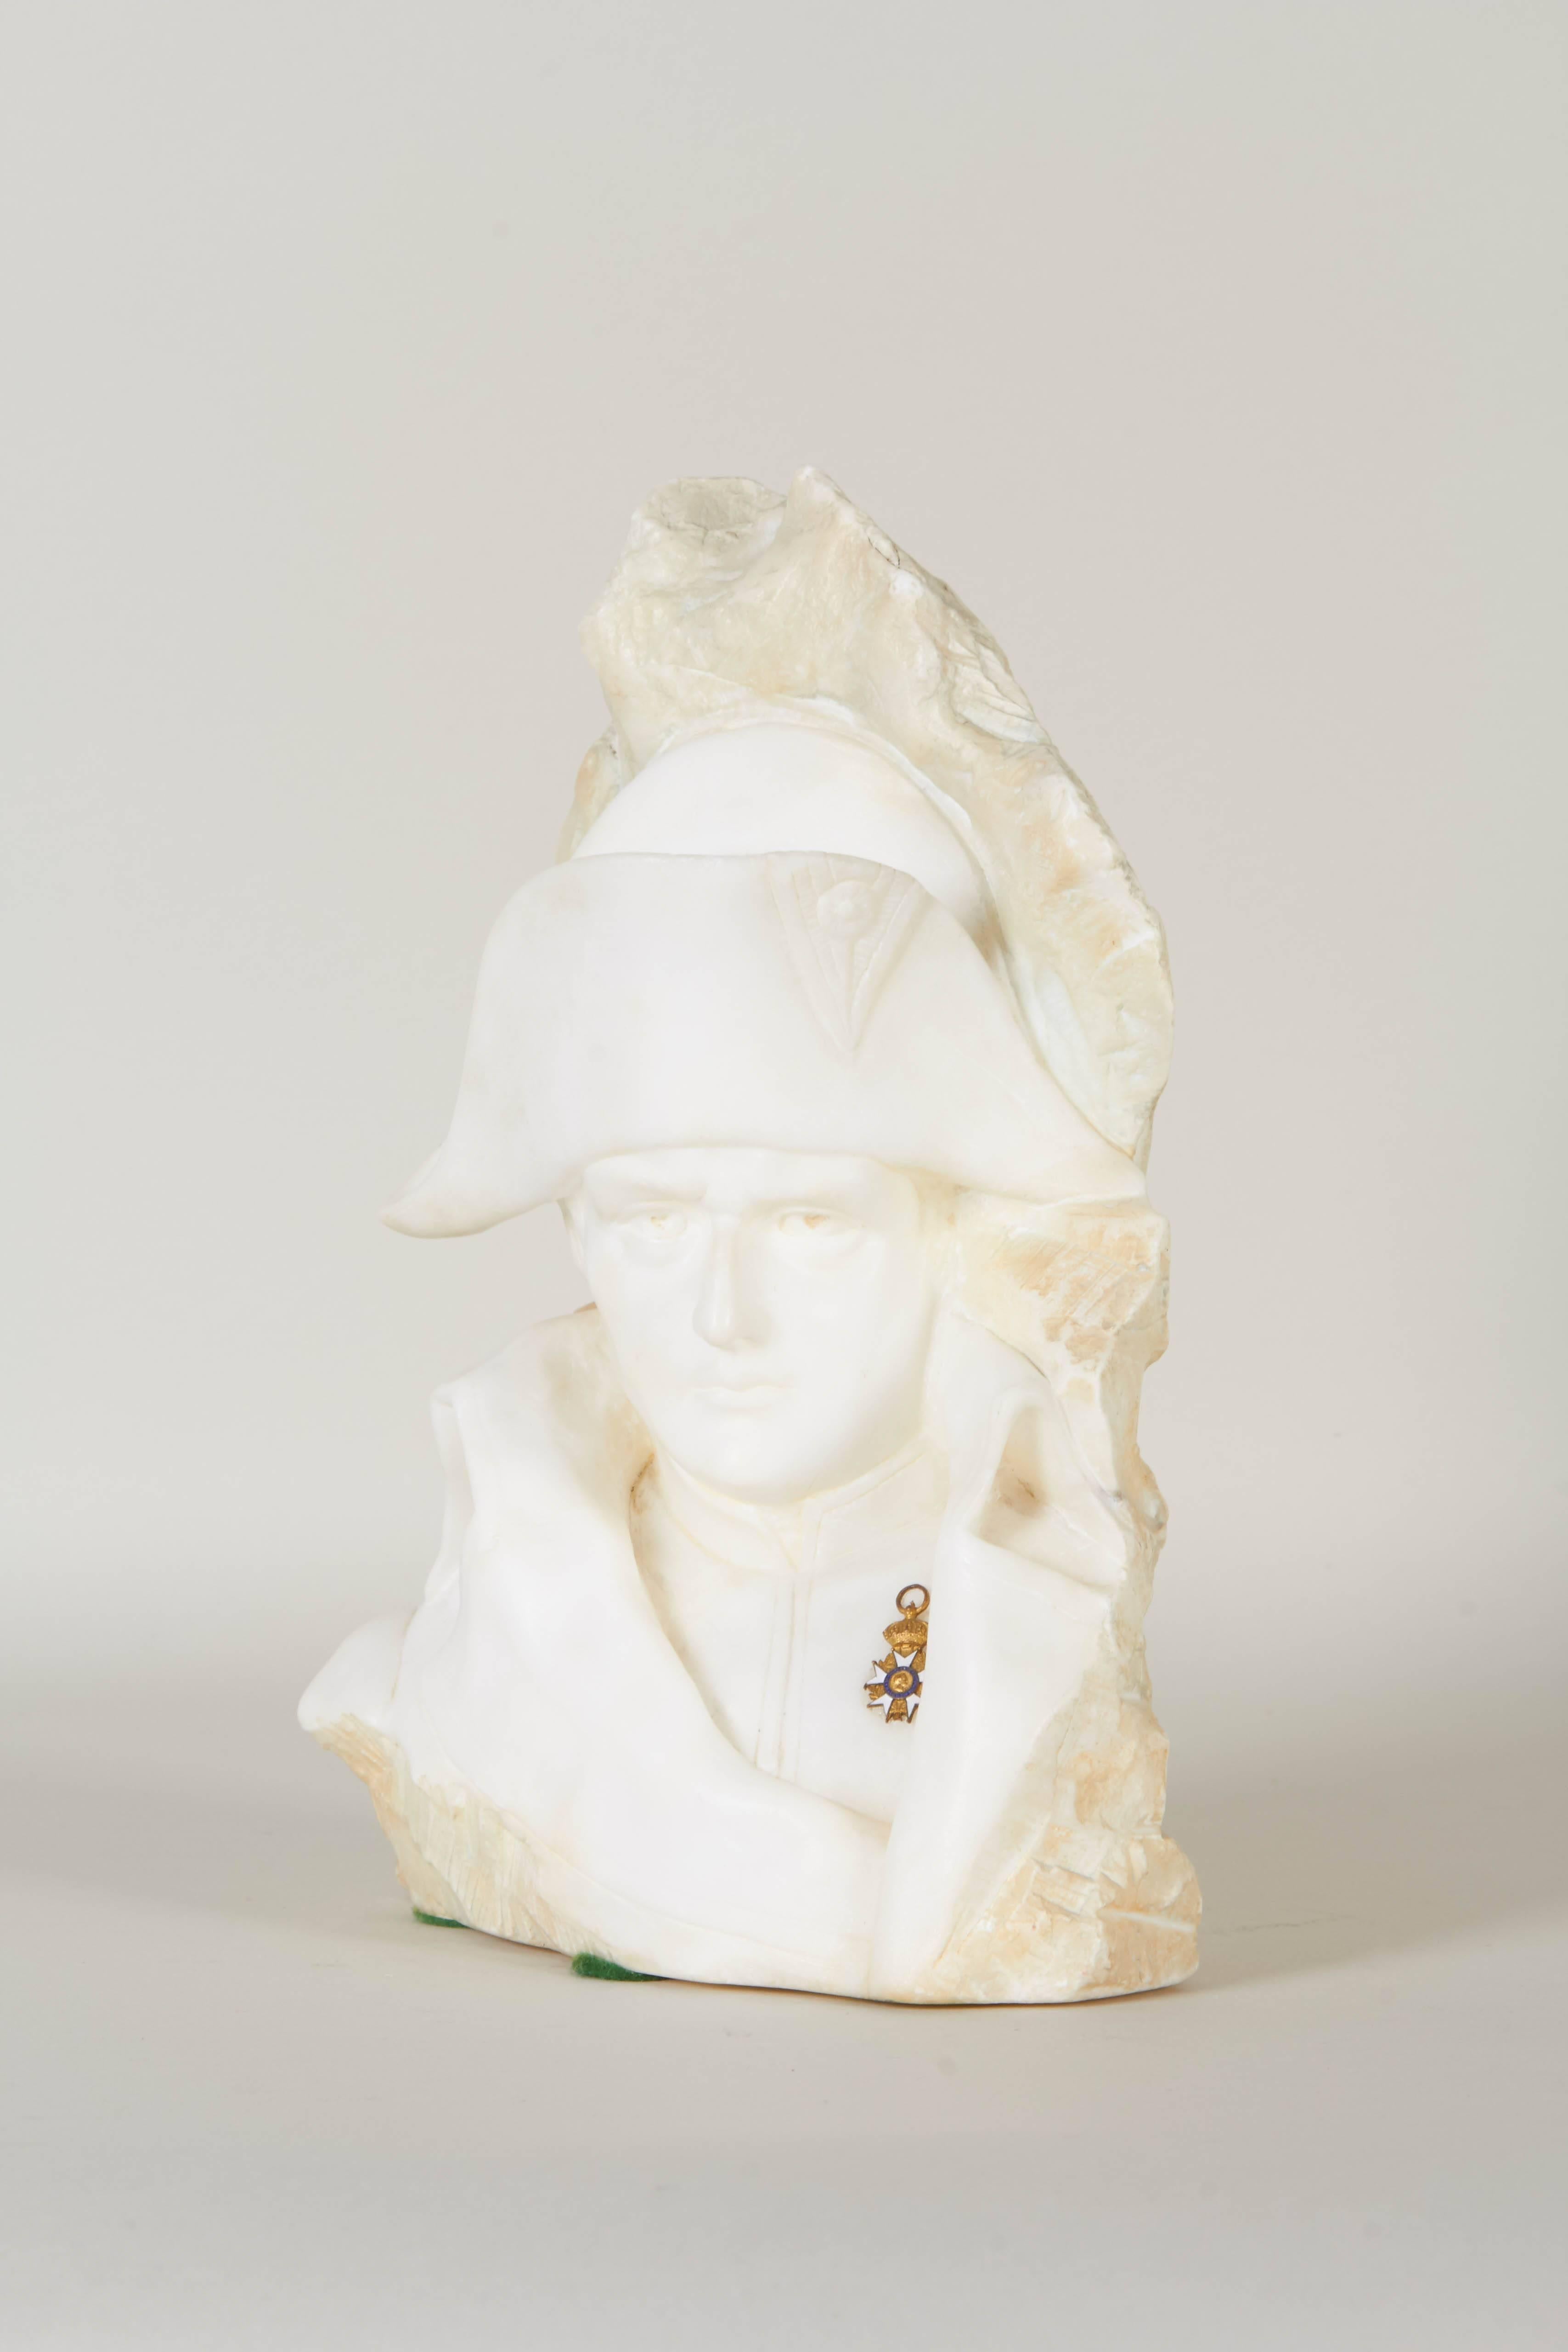 A Fritz Kochendörfer small scale carved alabaster bust of Napoleon Bonaparte, signed P. Braun, produced in Munich within the late 19th century period; the profile depicted emerging against rough cut stone. Signed [P. Braun] to lower half of the